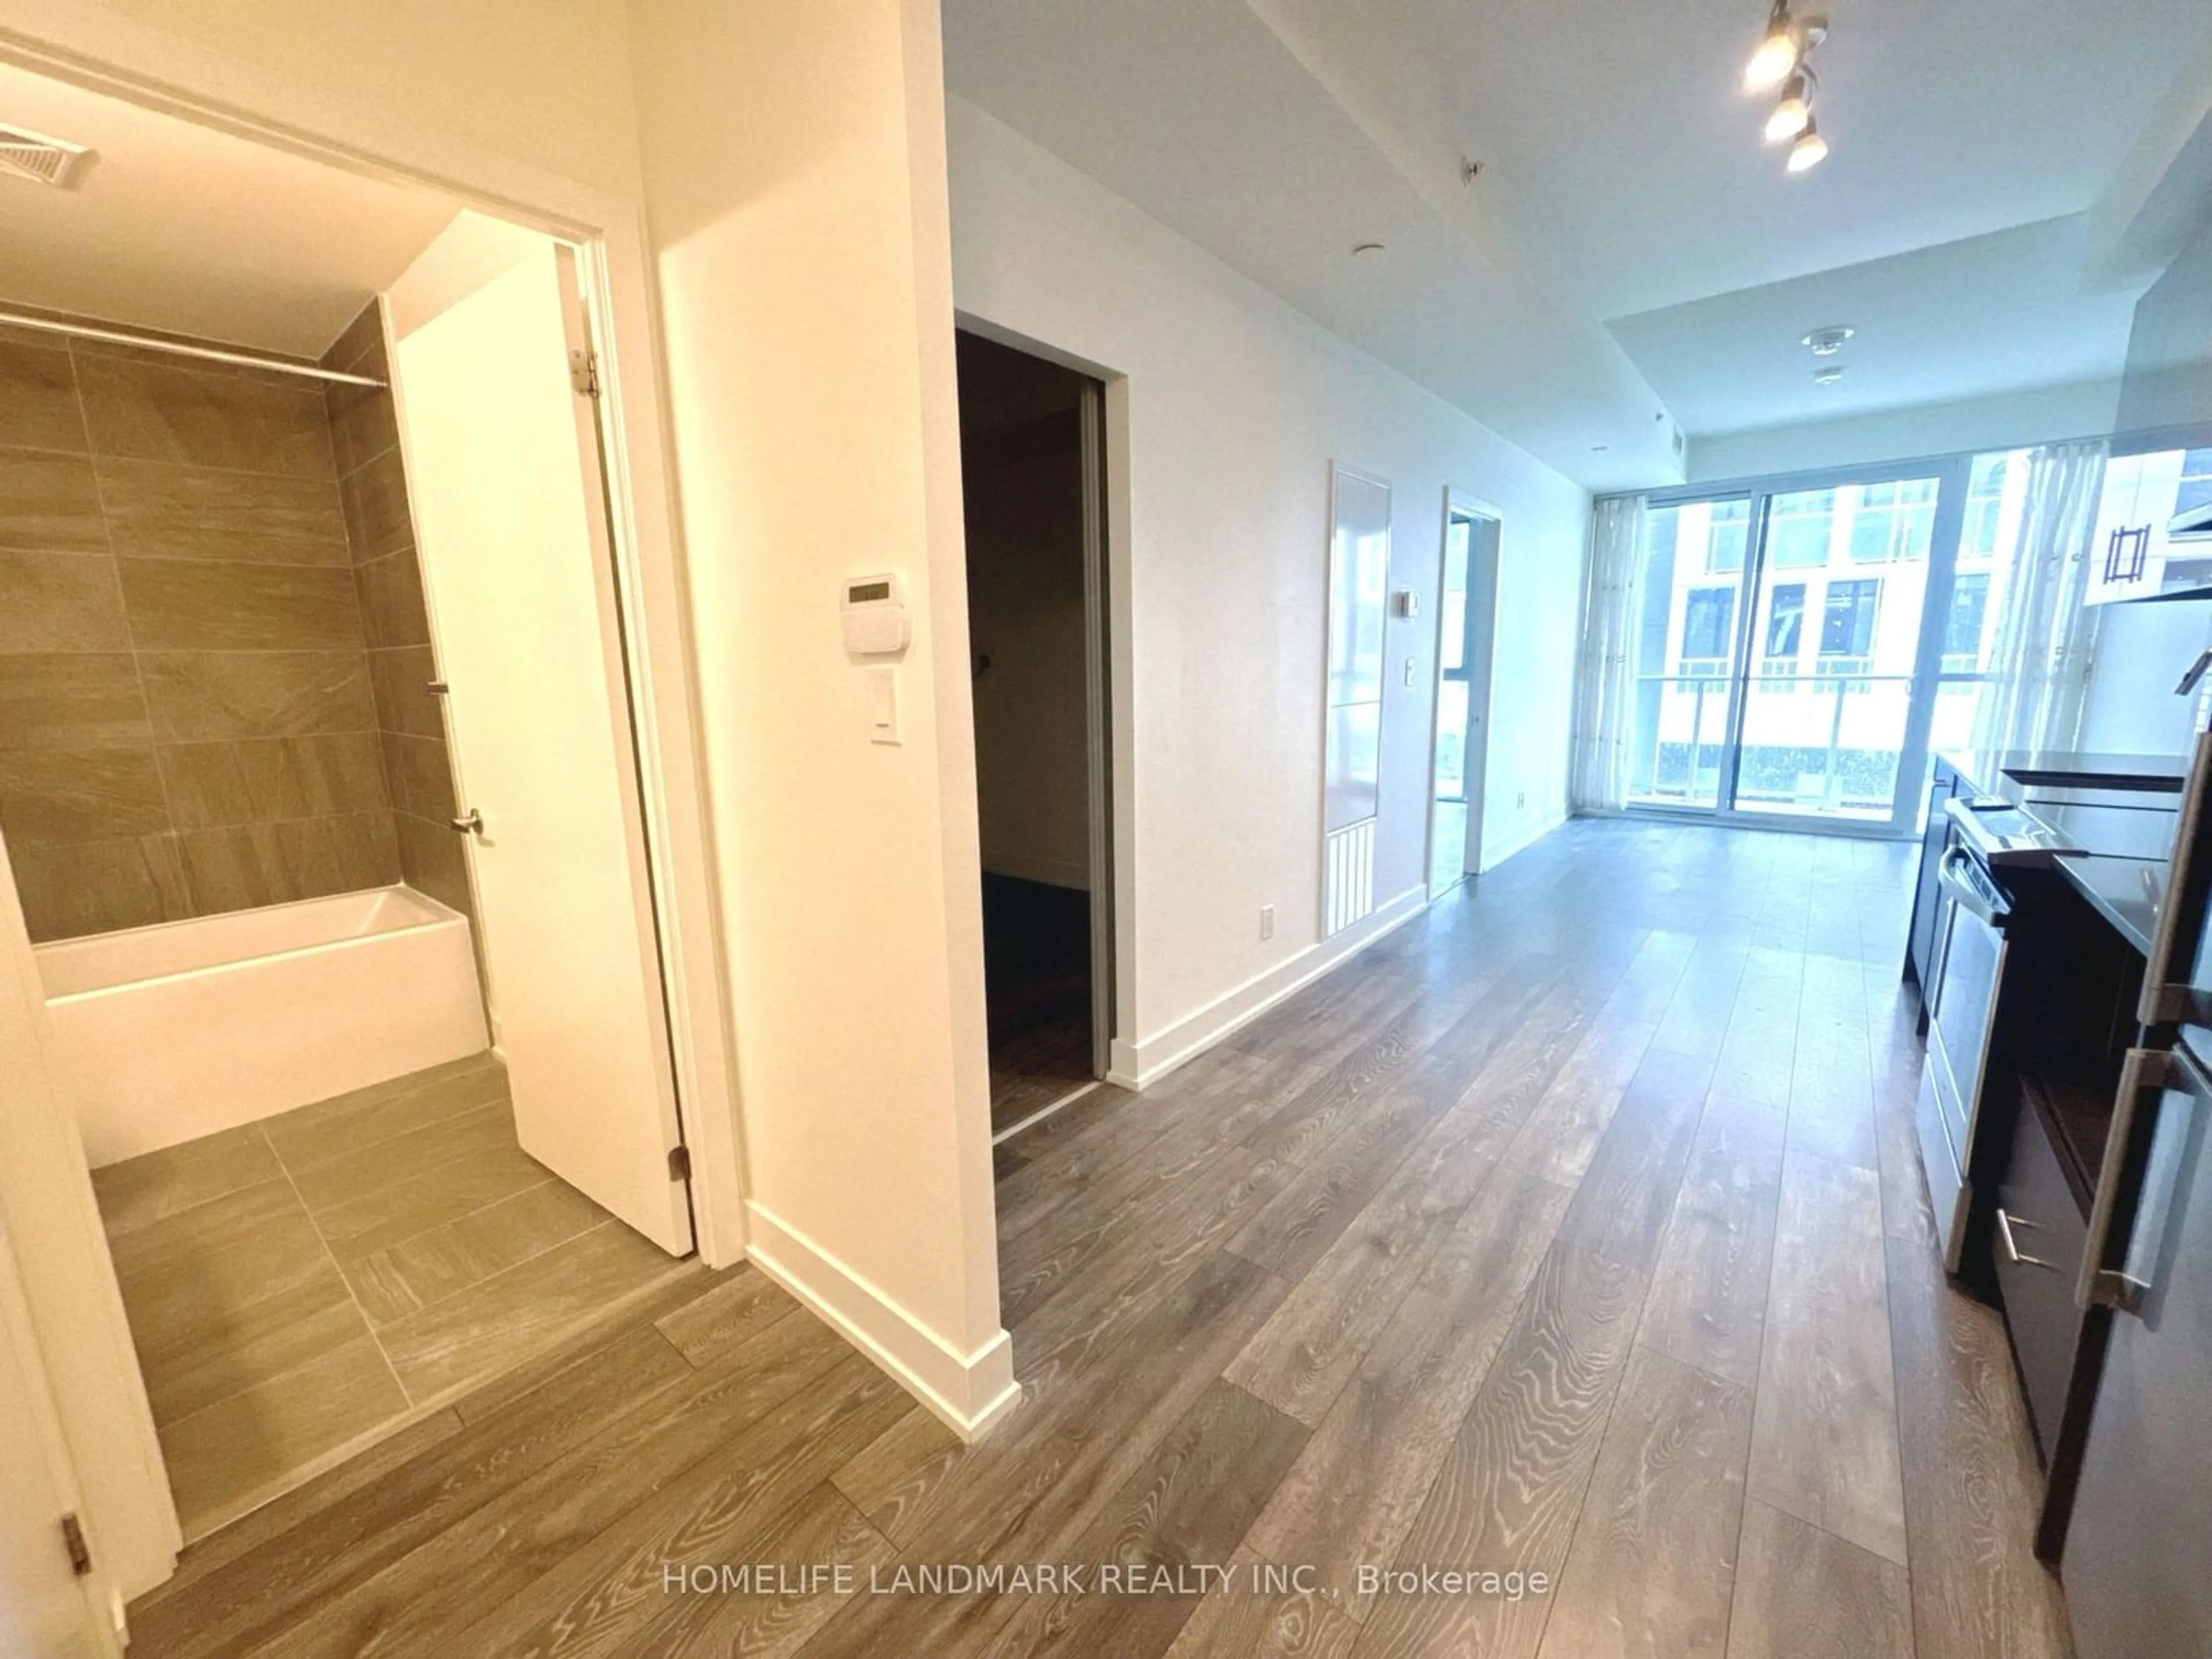 Other indoor space for 180 Fairview Mall Dr #211, Toronto Ontario M2J 0G4